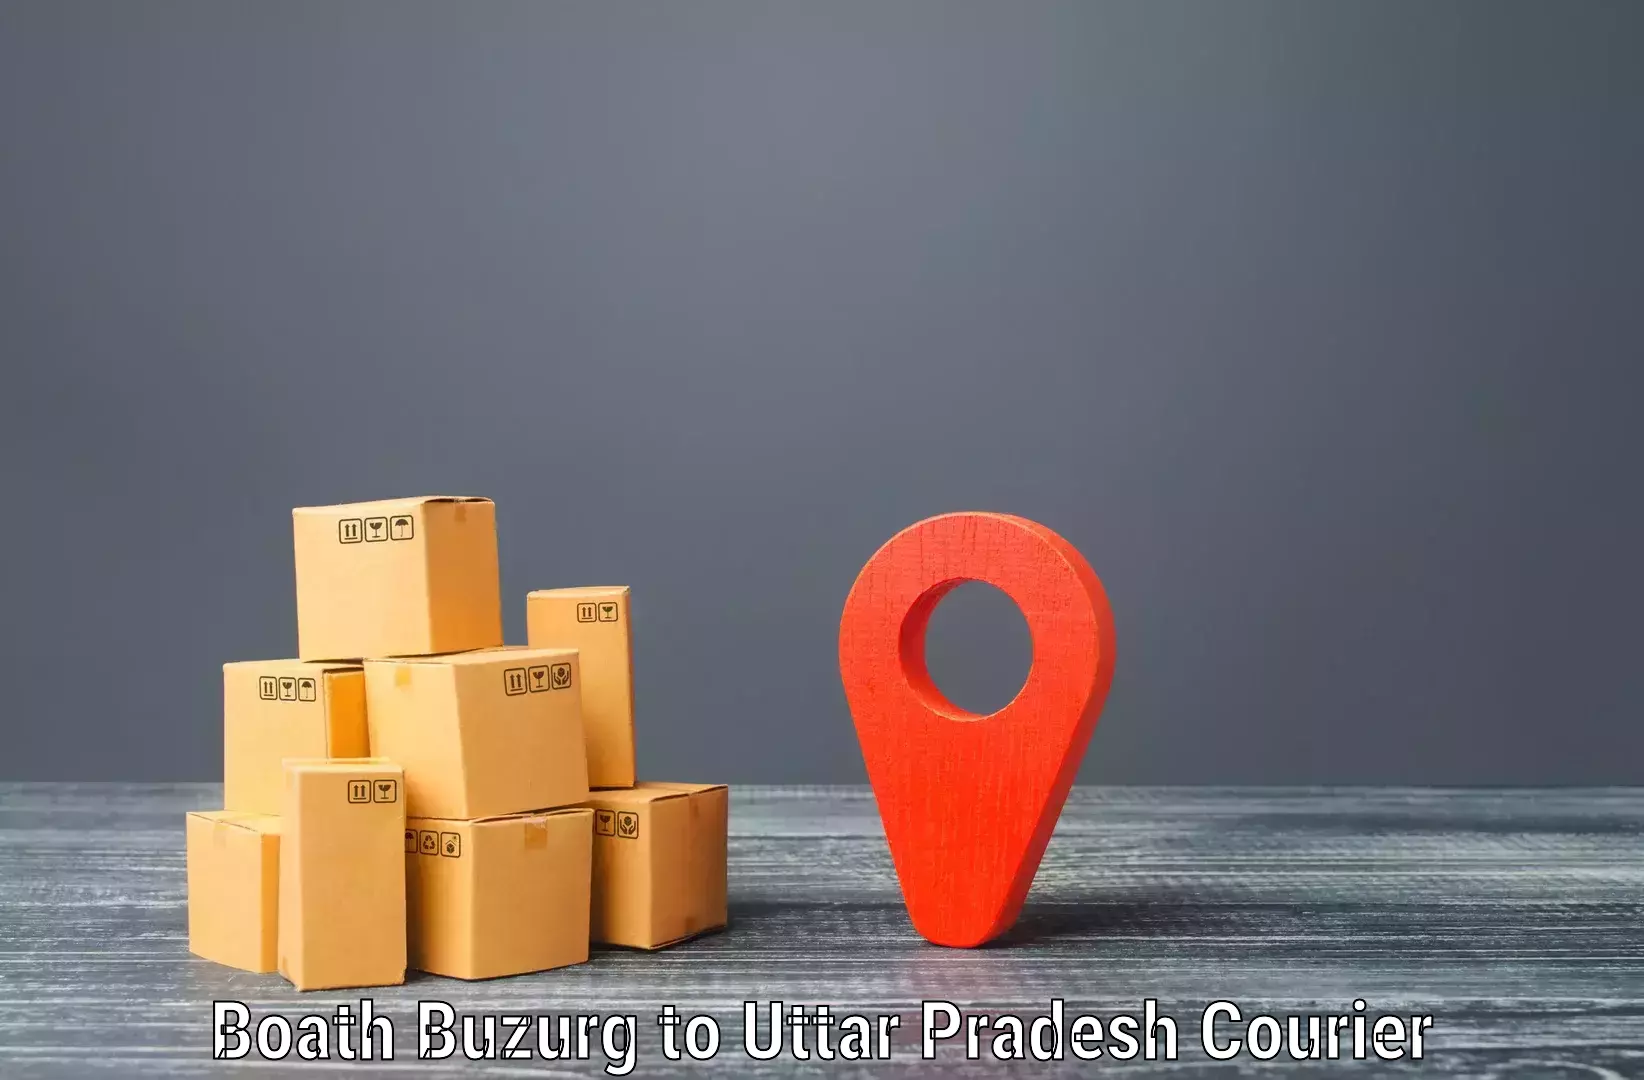 Smart parcel delivery Boath Buzurg to Ayodhya